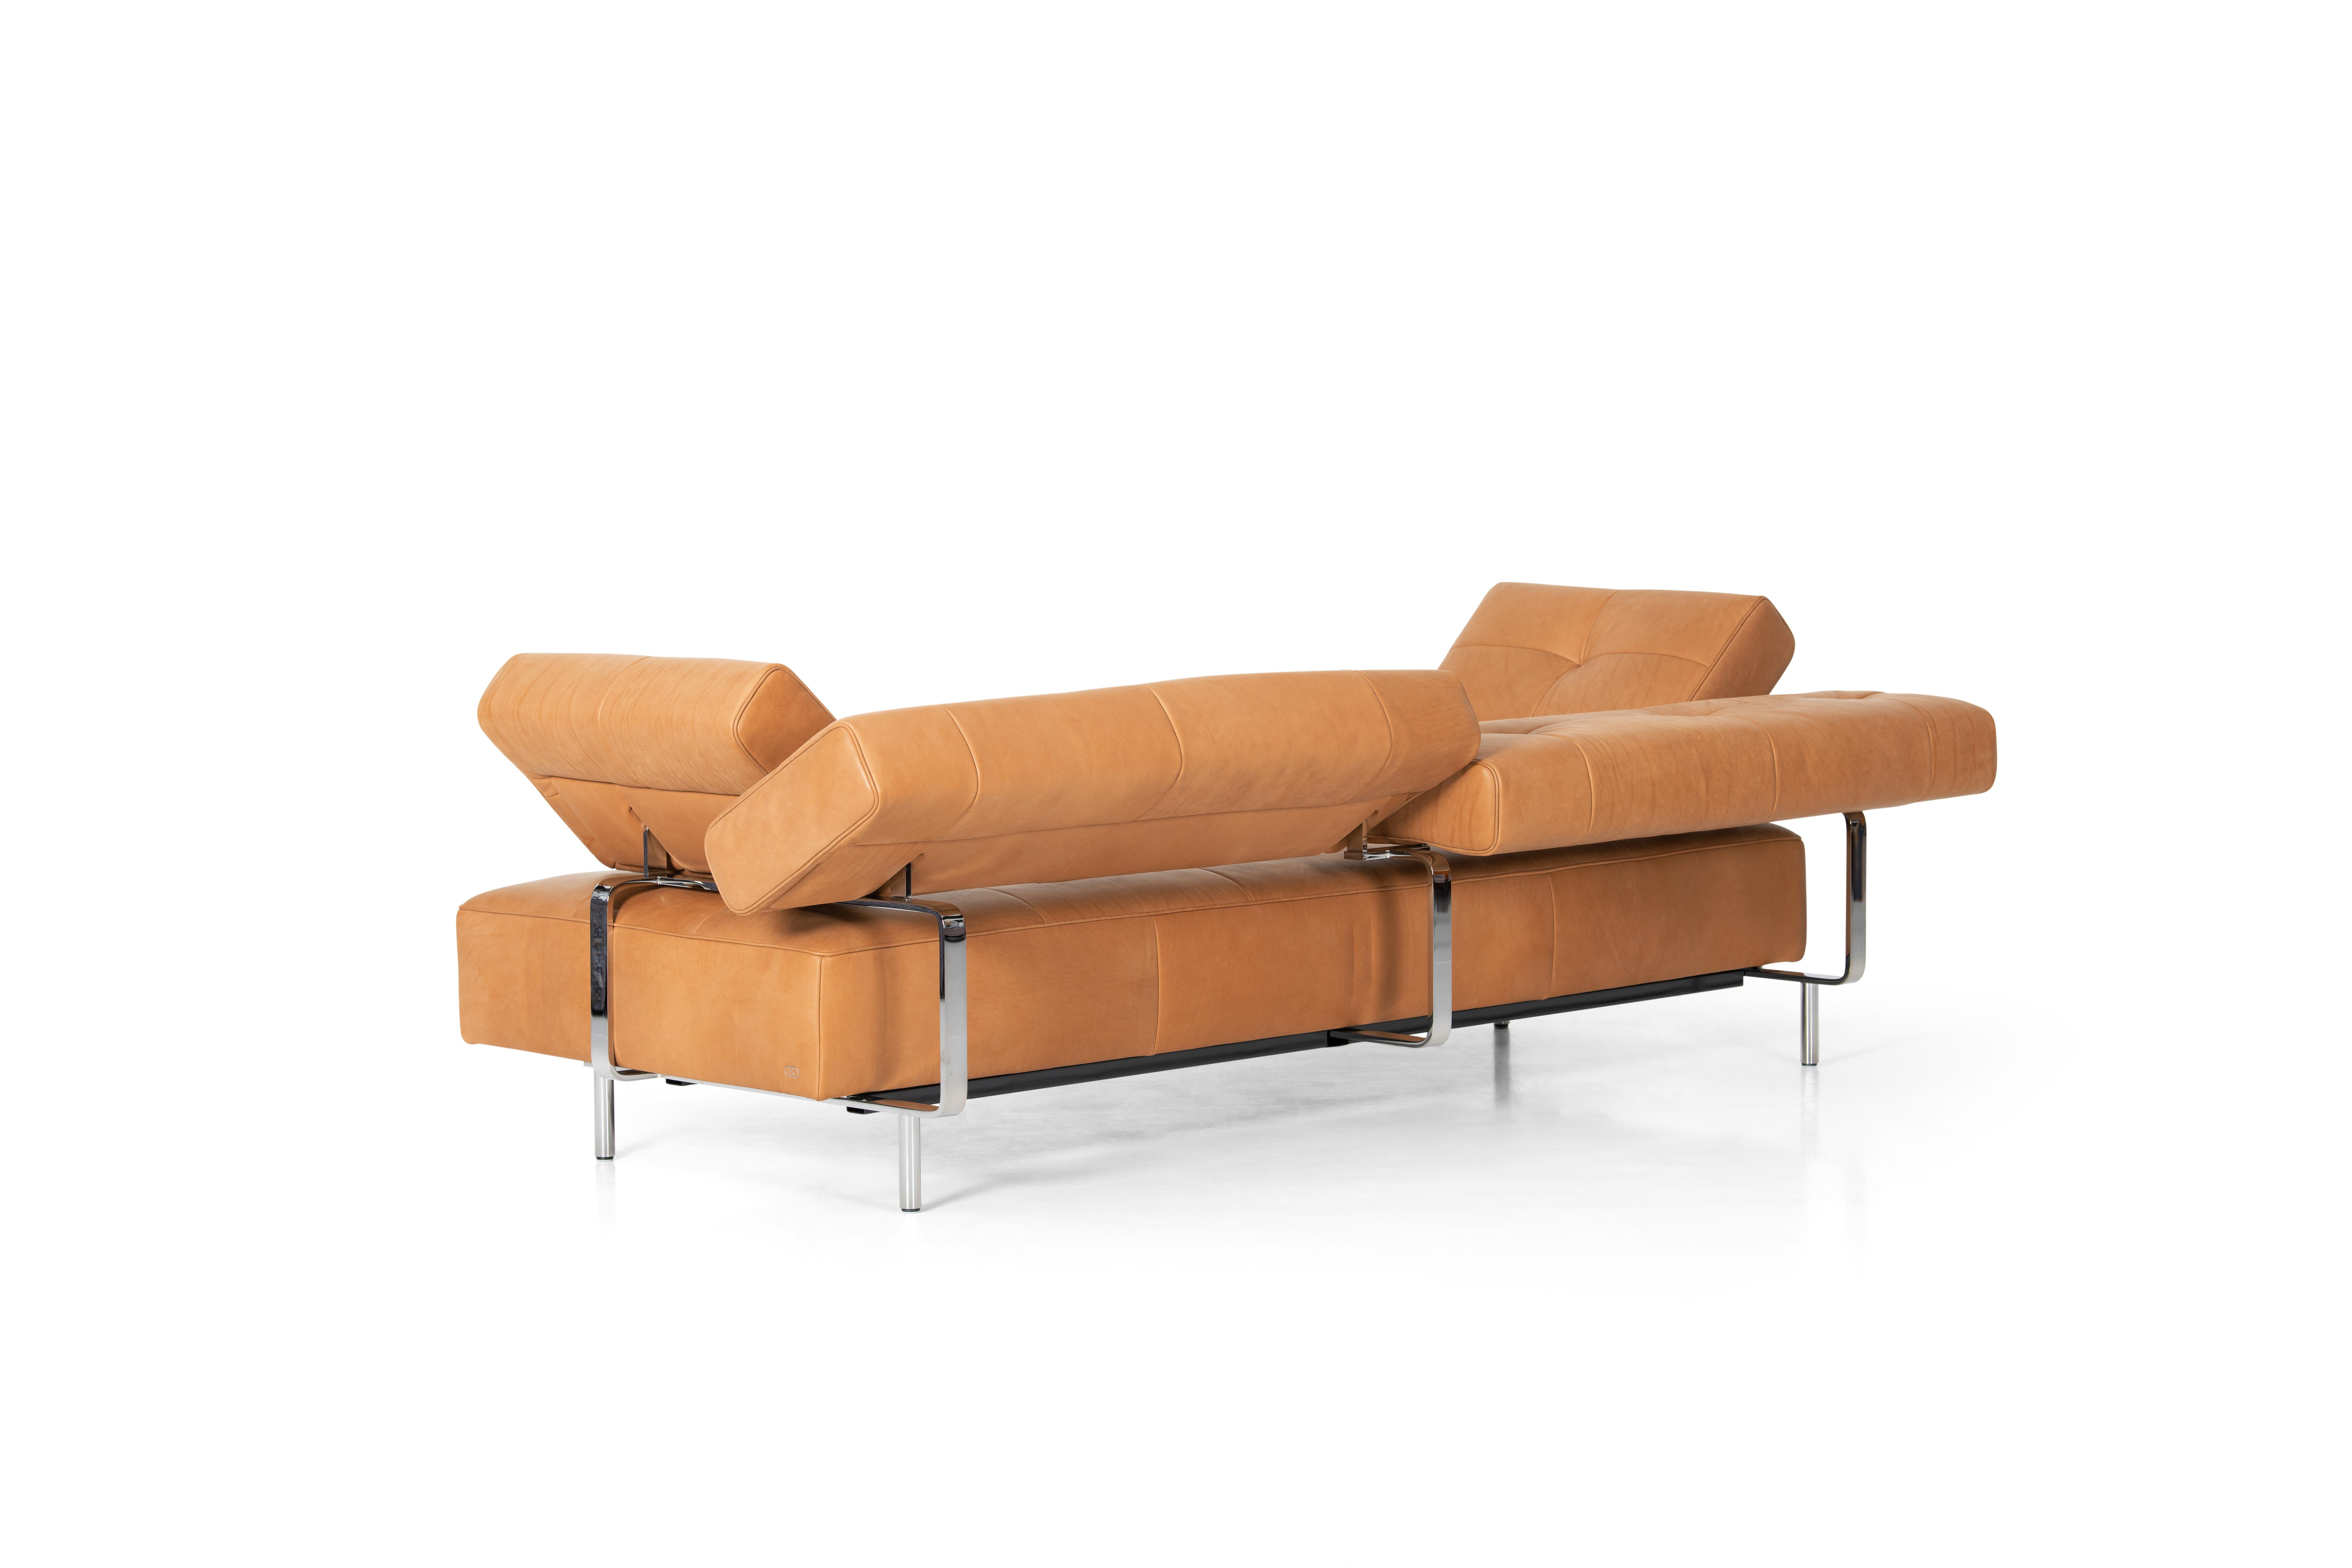 Swiss De Sede DS-880/23 Comfortable Sofa in Cuoio Leather Seat and Back Upholstery For Sale